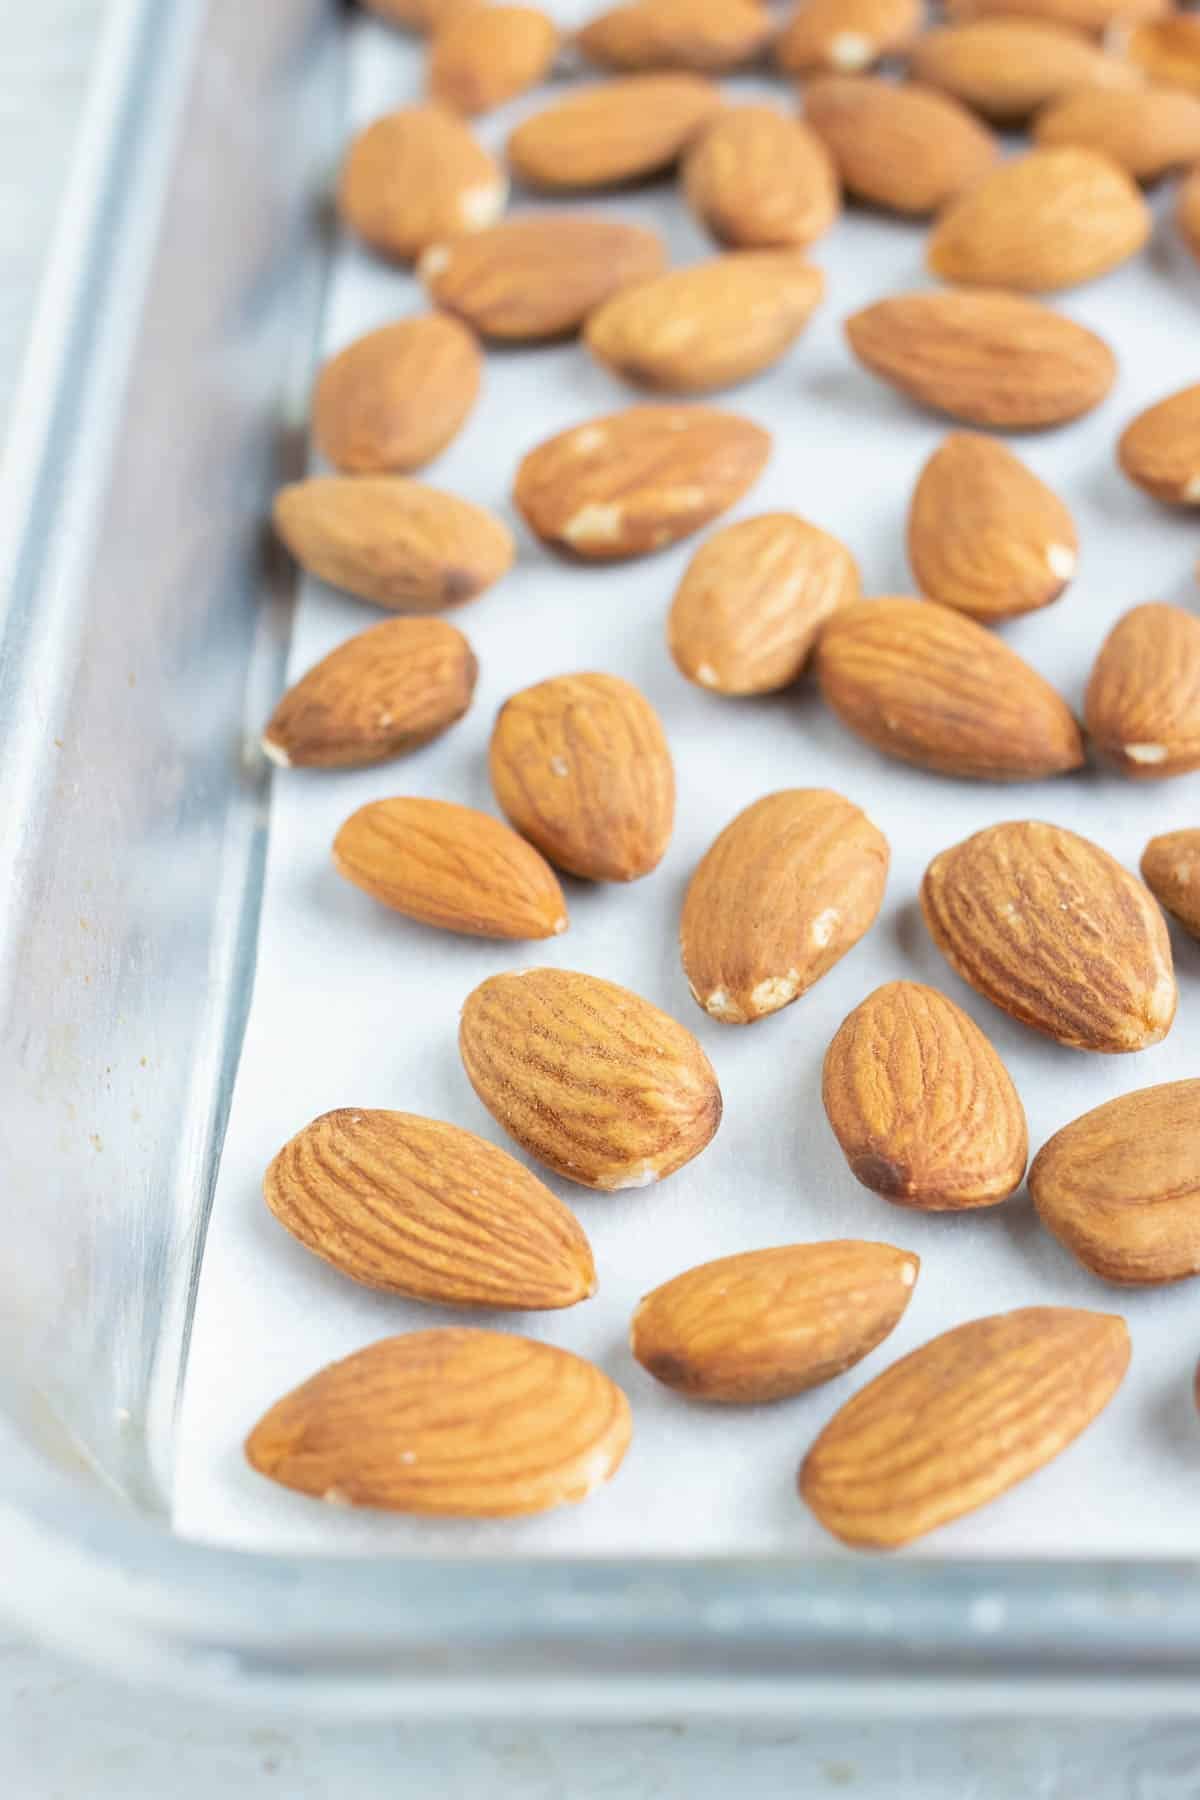 Perfectly roasted almonds are an easy snack recipe.